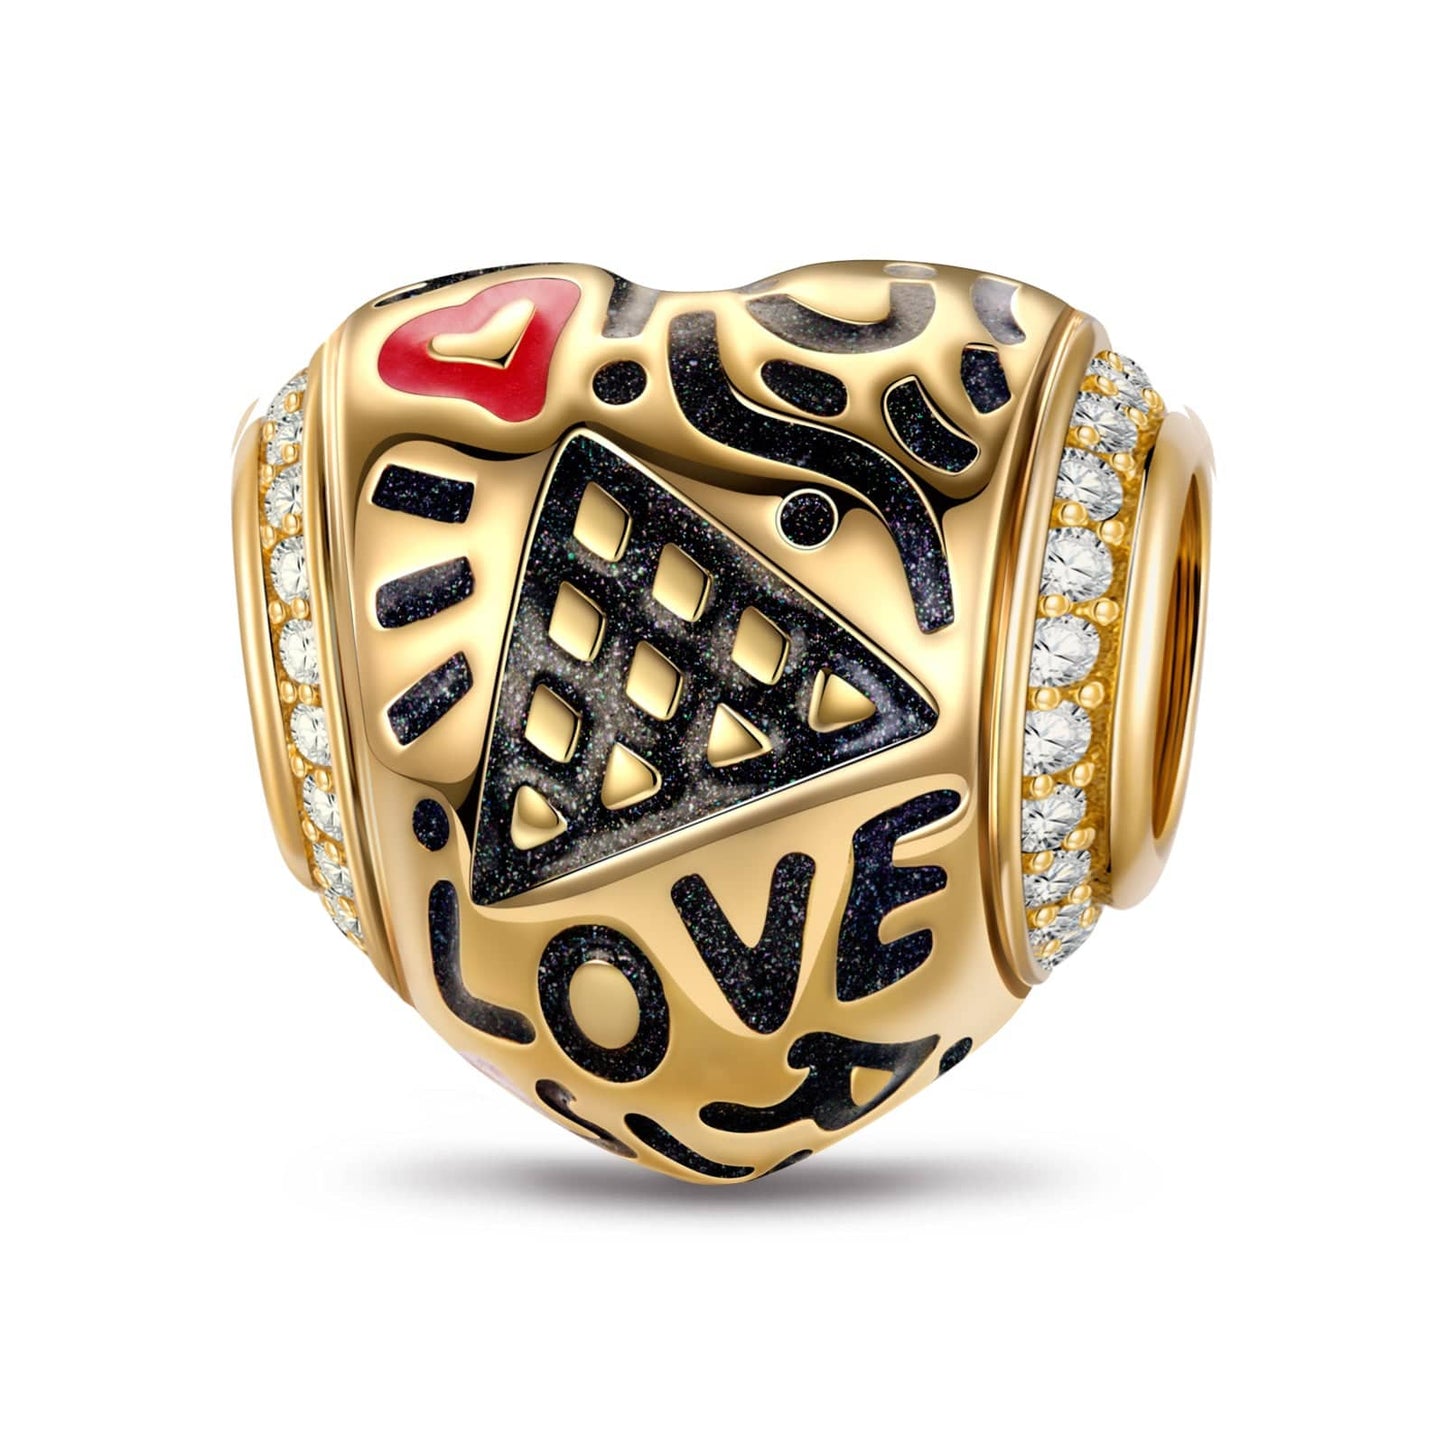 Romantic Graffiti Tarnish-resistant Silver Charms With Enamel In 14K Gold Plated